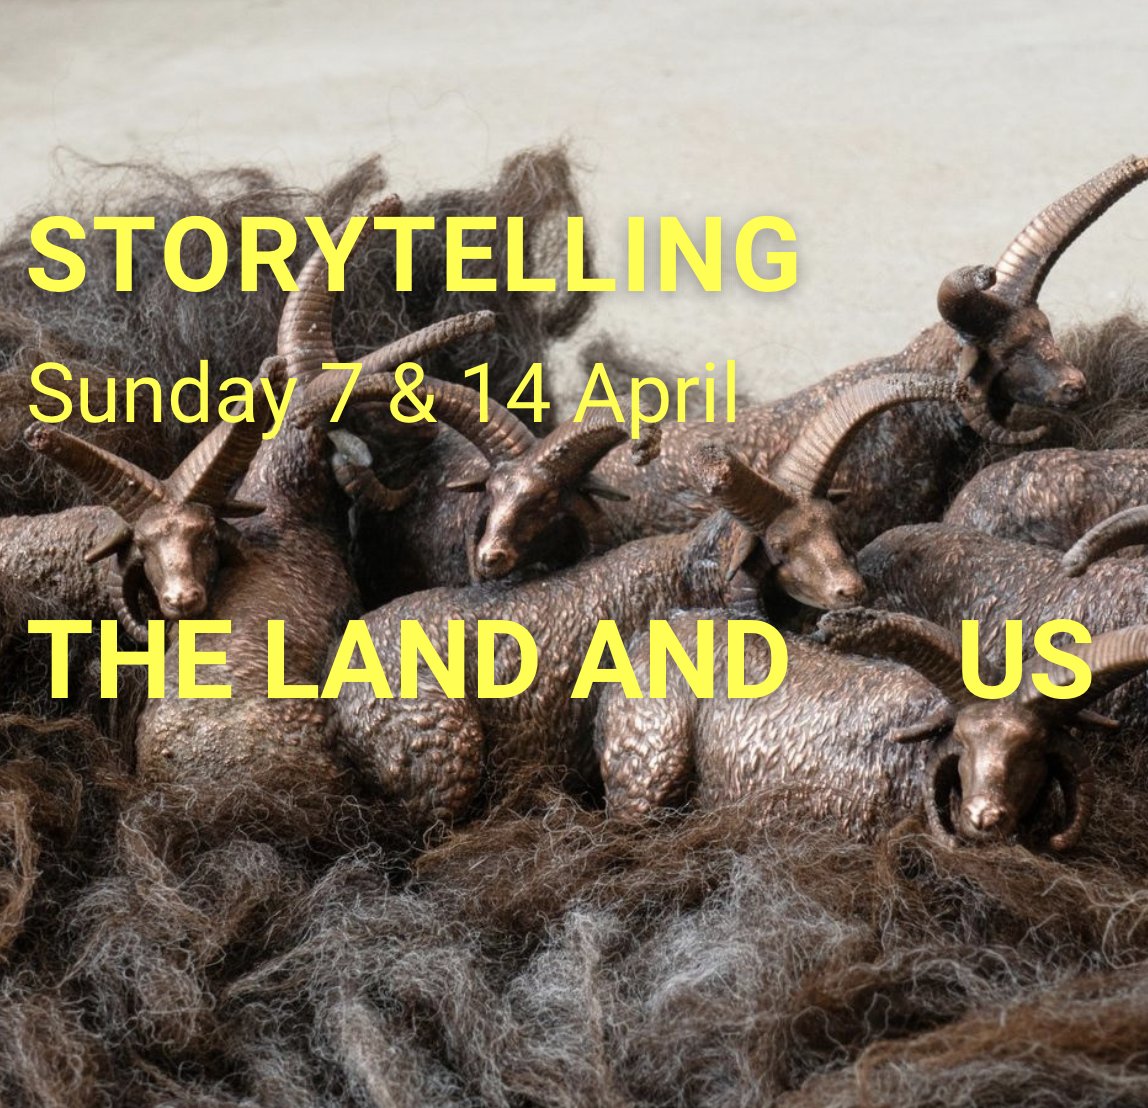 STORYTELLING FAMILY SESSION SUNDAT AT 10.30am AT CAPITAL HOUSE 👨‍👨‍👧‍👧 Join us at our exhibition space this coming Sunday morning as Paul Journeaux will take you and your family on a journey through the The Land and Us exhibition, using storytelling. BOOK: shorturl.at/bzDHY